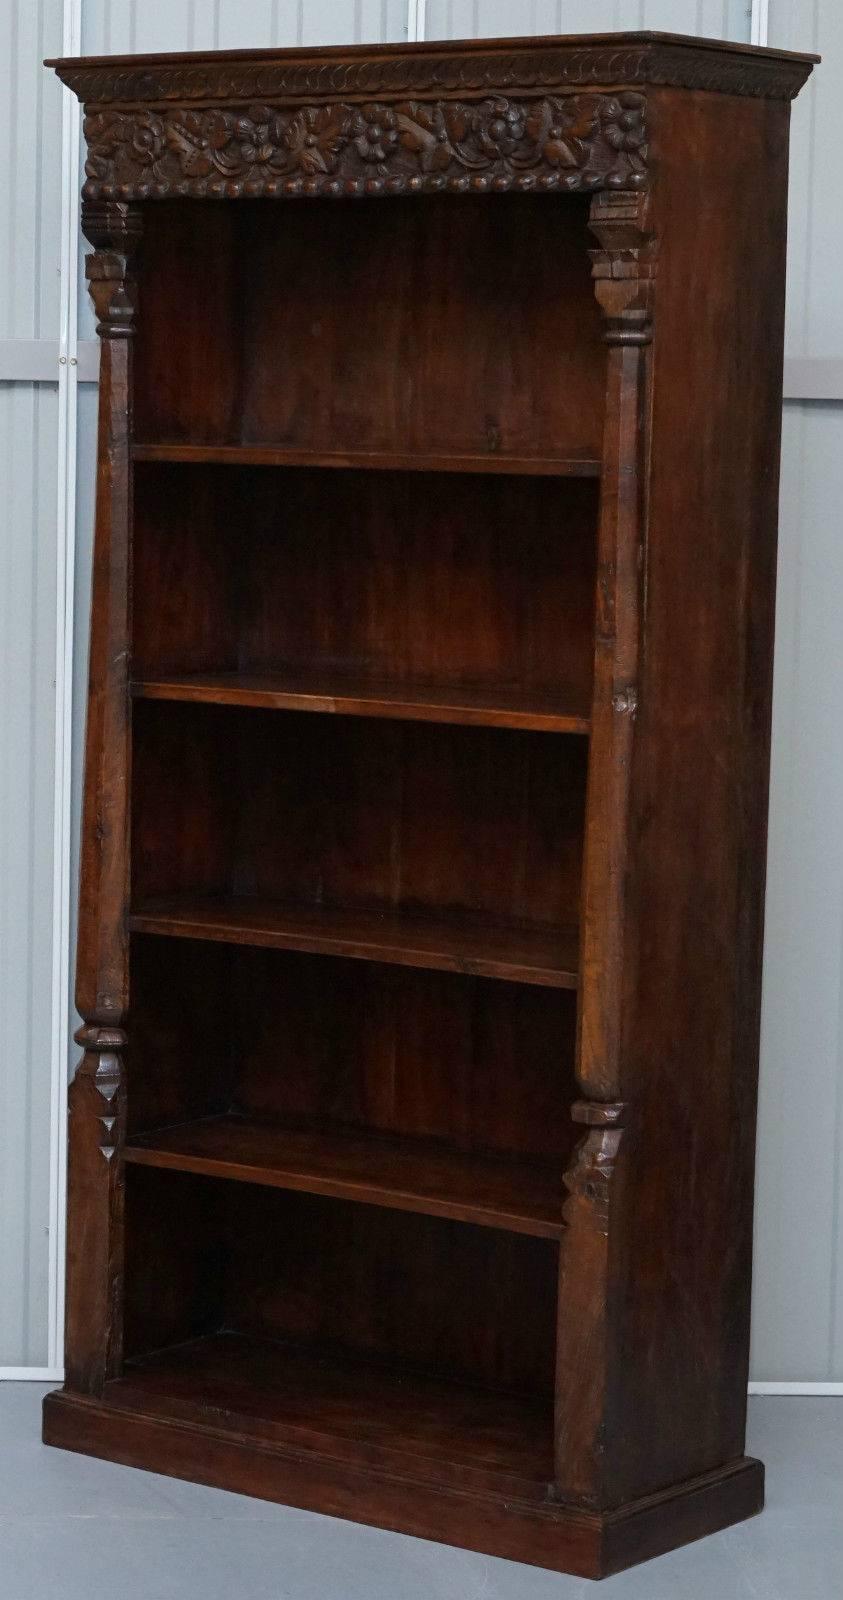 Solid Hand-Carved Teak Wood Bookcase, Extremely Heavy and Solid Well Made Piece 3